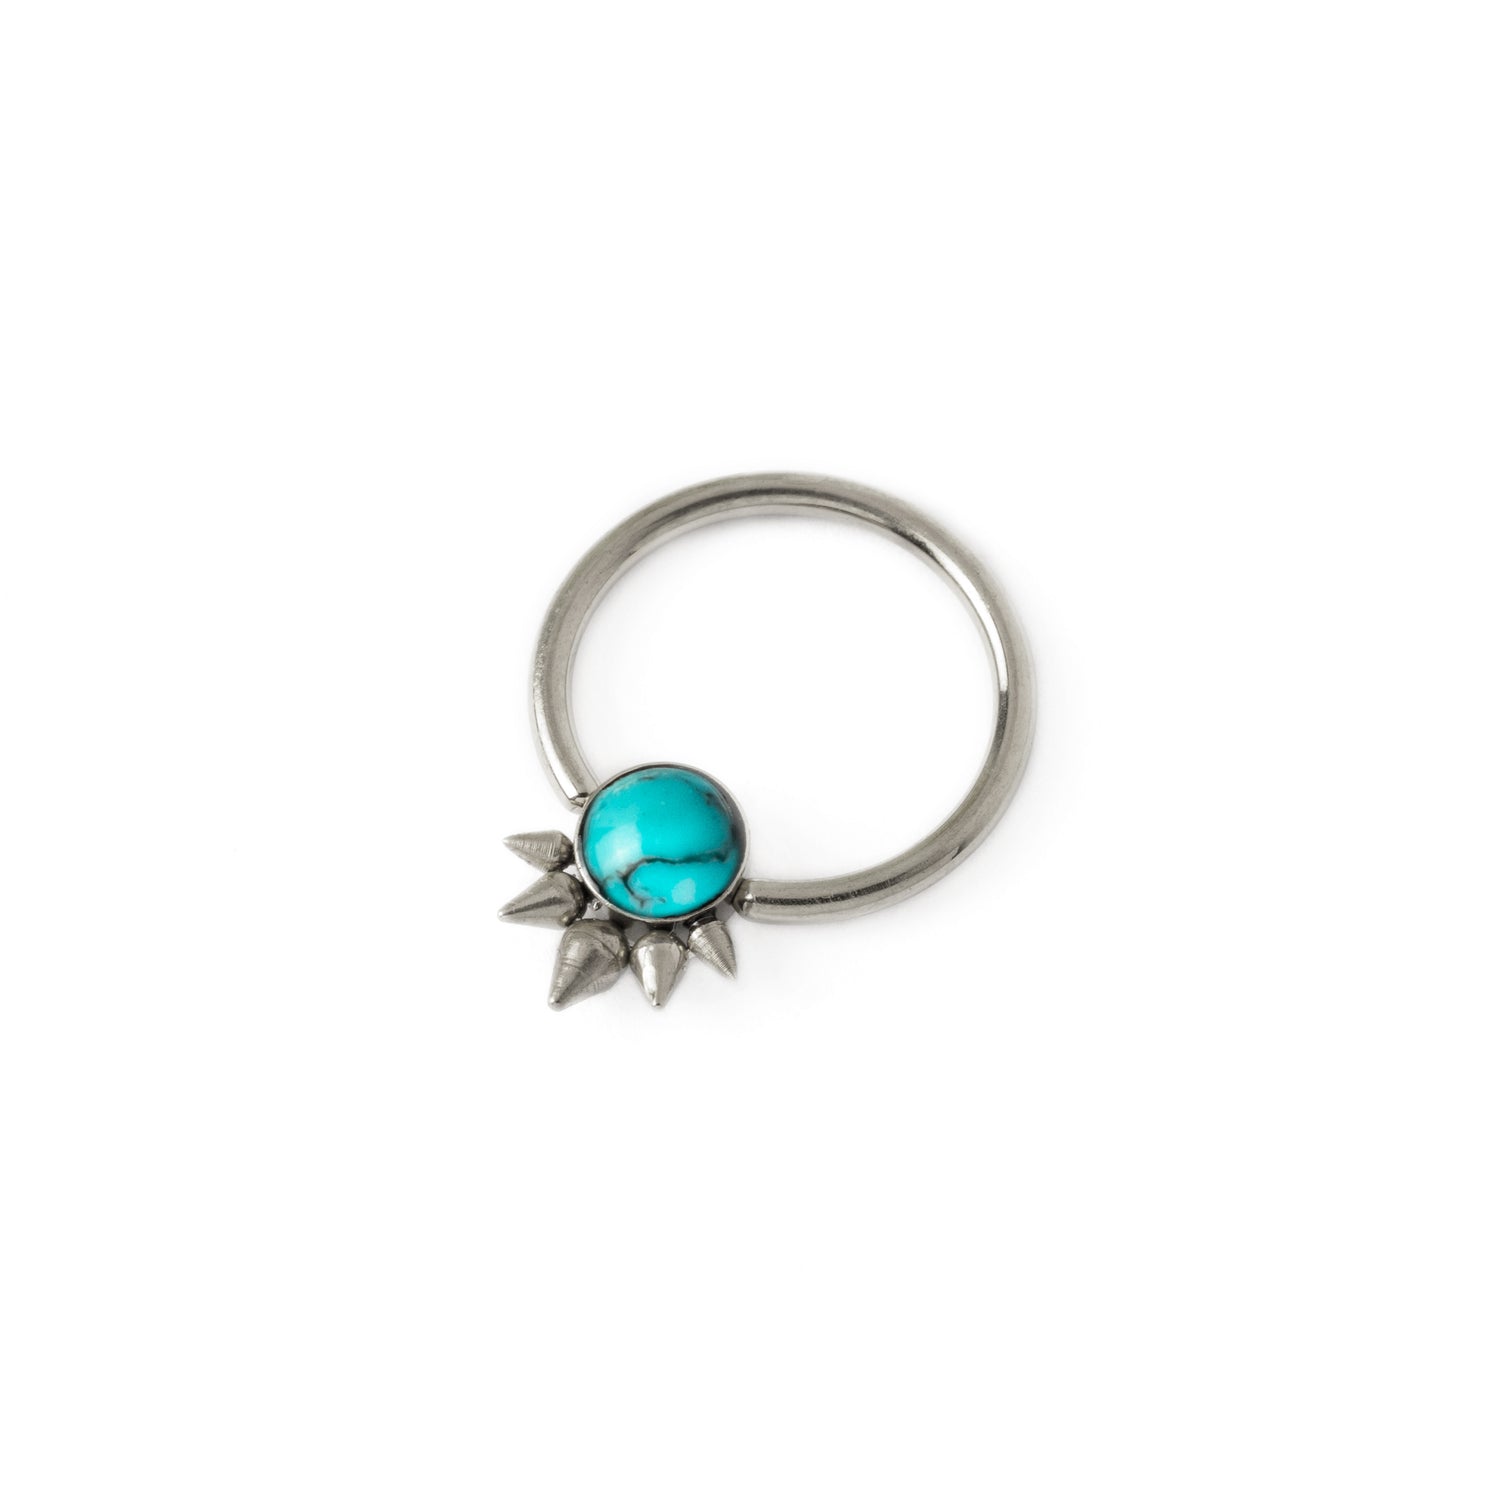 Brenna Spiky CBR with Turquoise